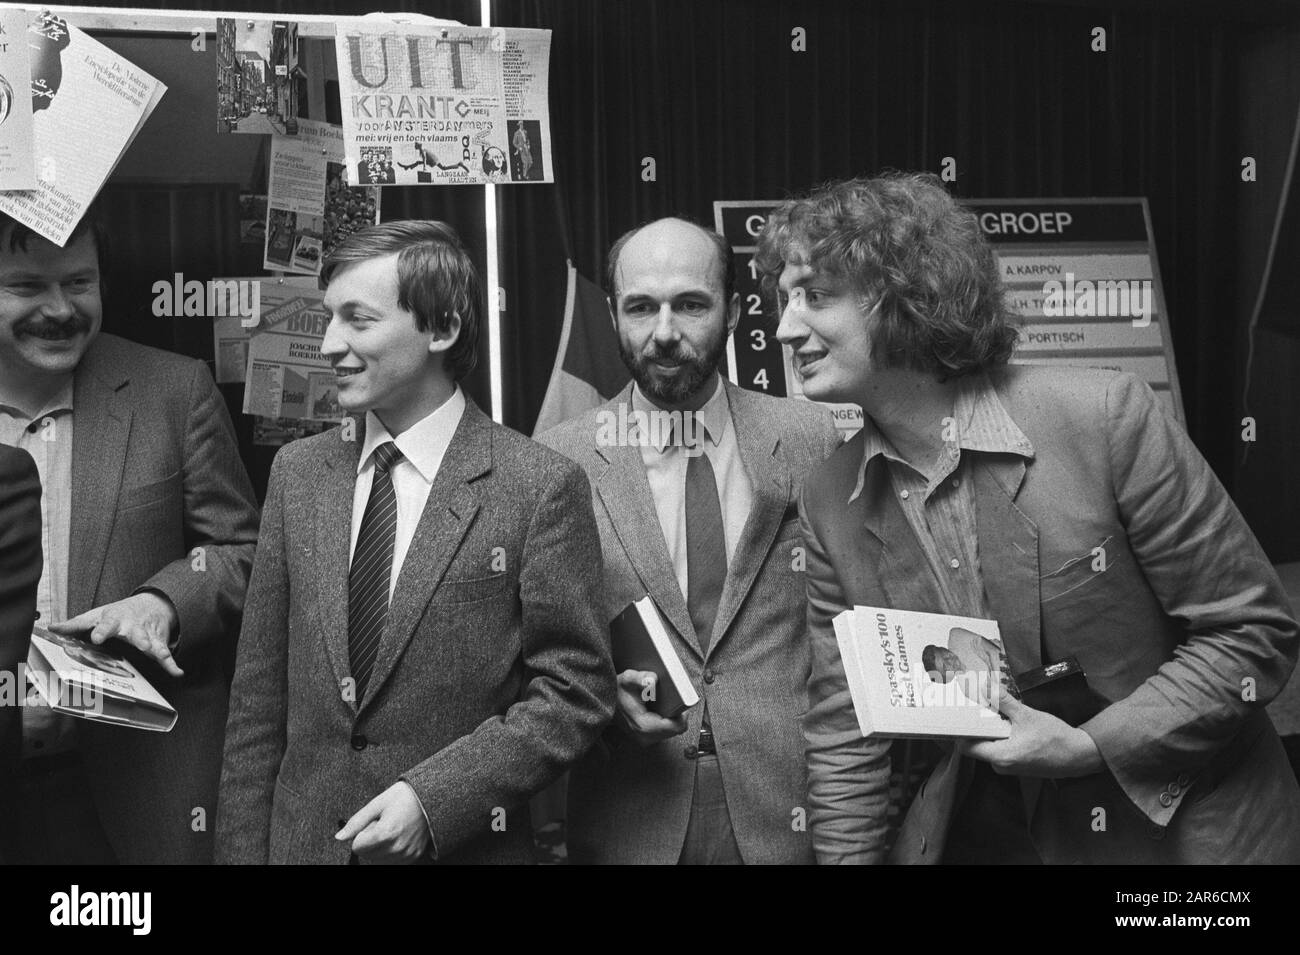 Lot IBM chess tournament at Crest Hotel in Amsterdam, from l.n.r world champion Karpov, the American Kavalek and Jan Timman Date: 15 May 1981 Location: Amsterdam, Noord-Holland Keywords: chess Personal name: Karpov, Anatoli, Kavalek, Timman, Jan Institution name: IBM Chess Tournament Stock Photo